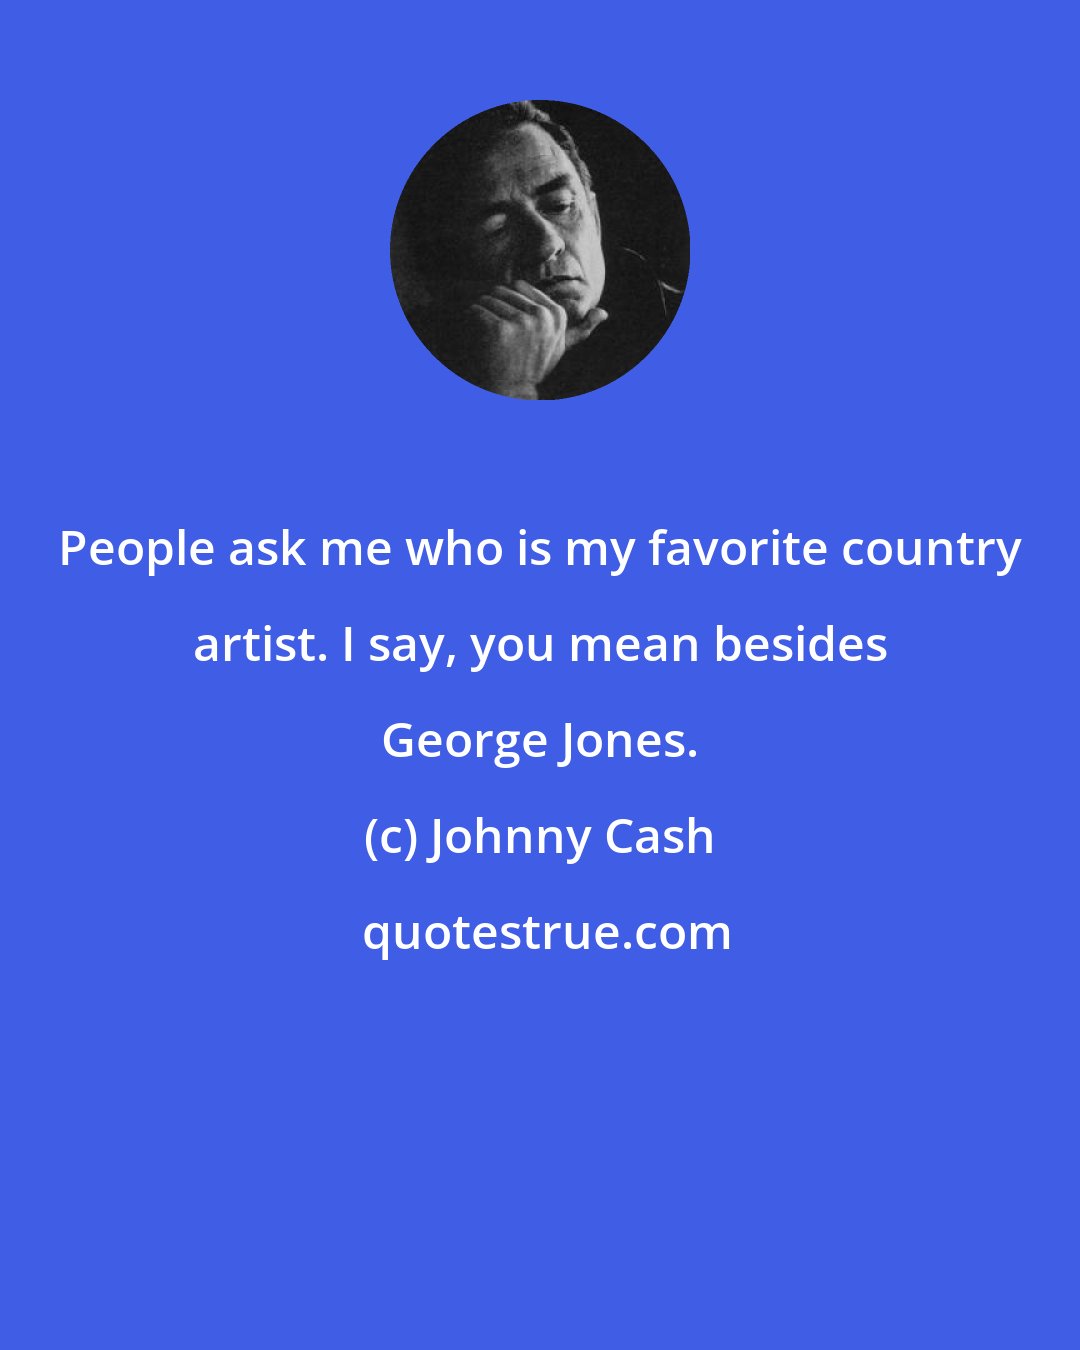 Johnny Cash: People ask me who is my favorite country artist. I say, you mean besides George Jones.